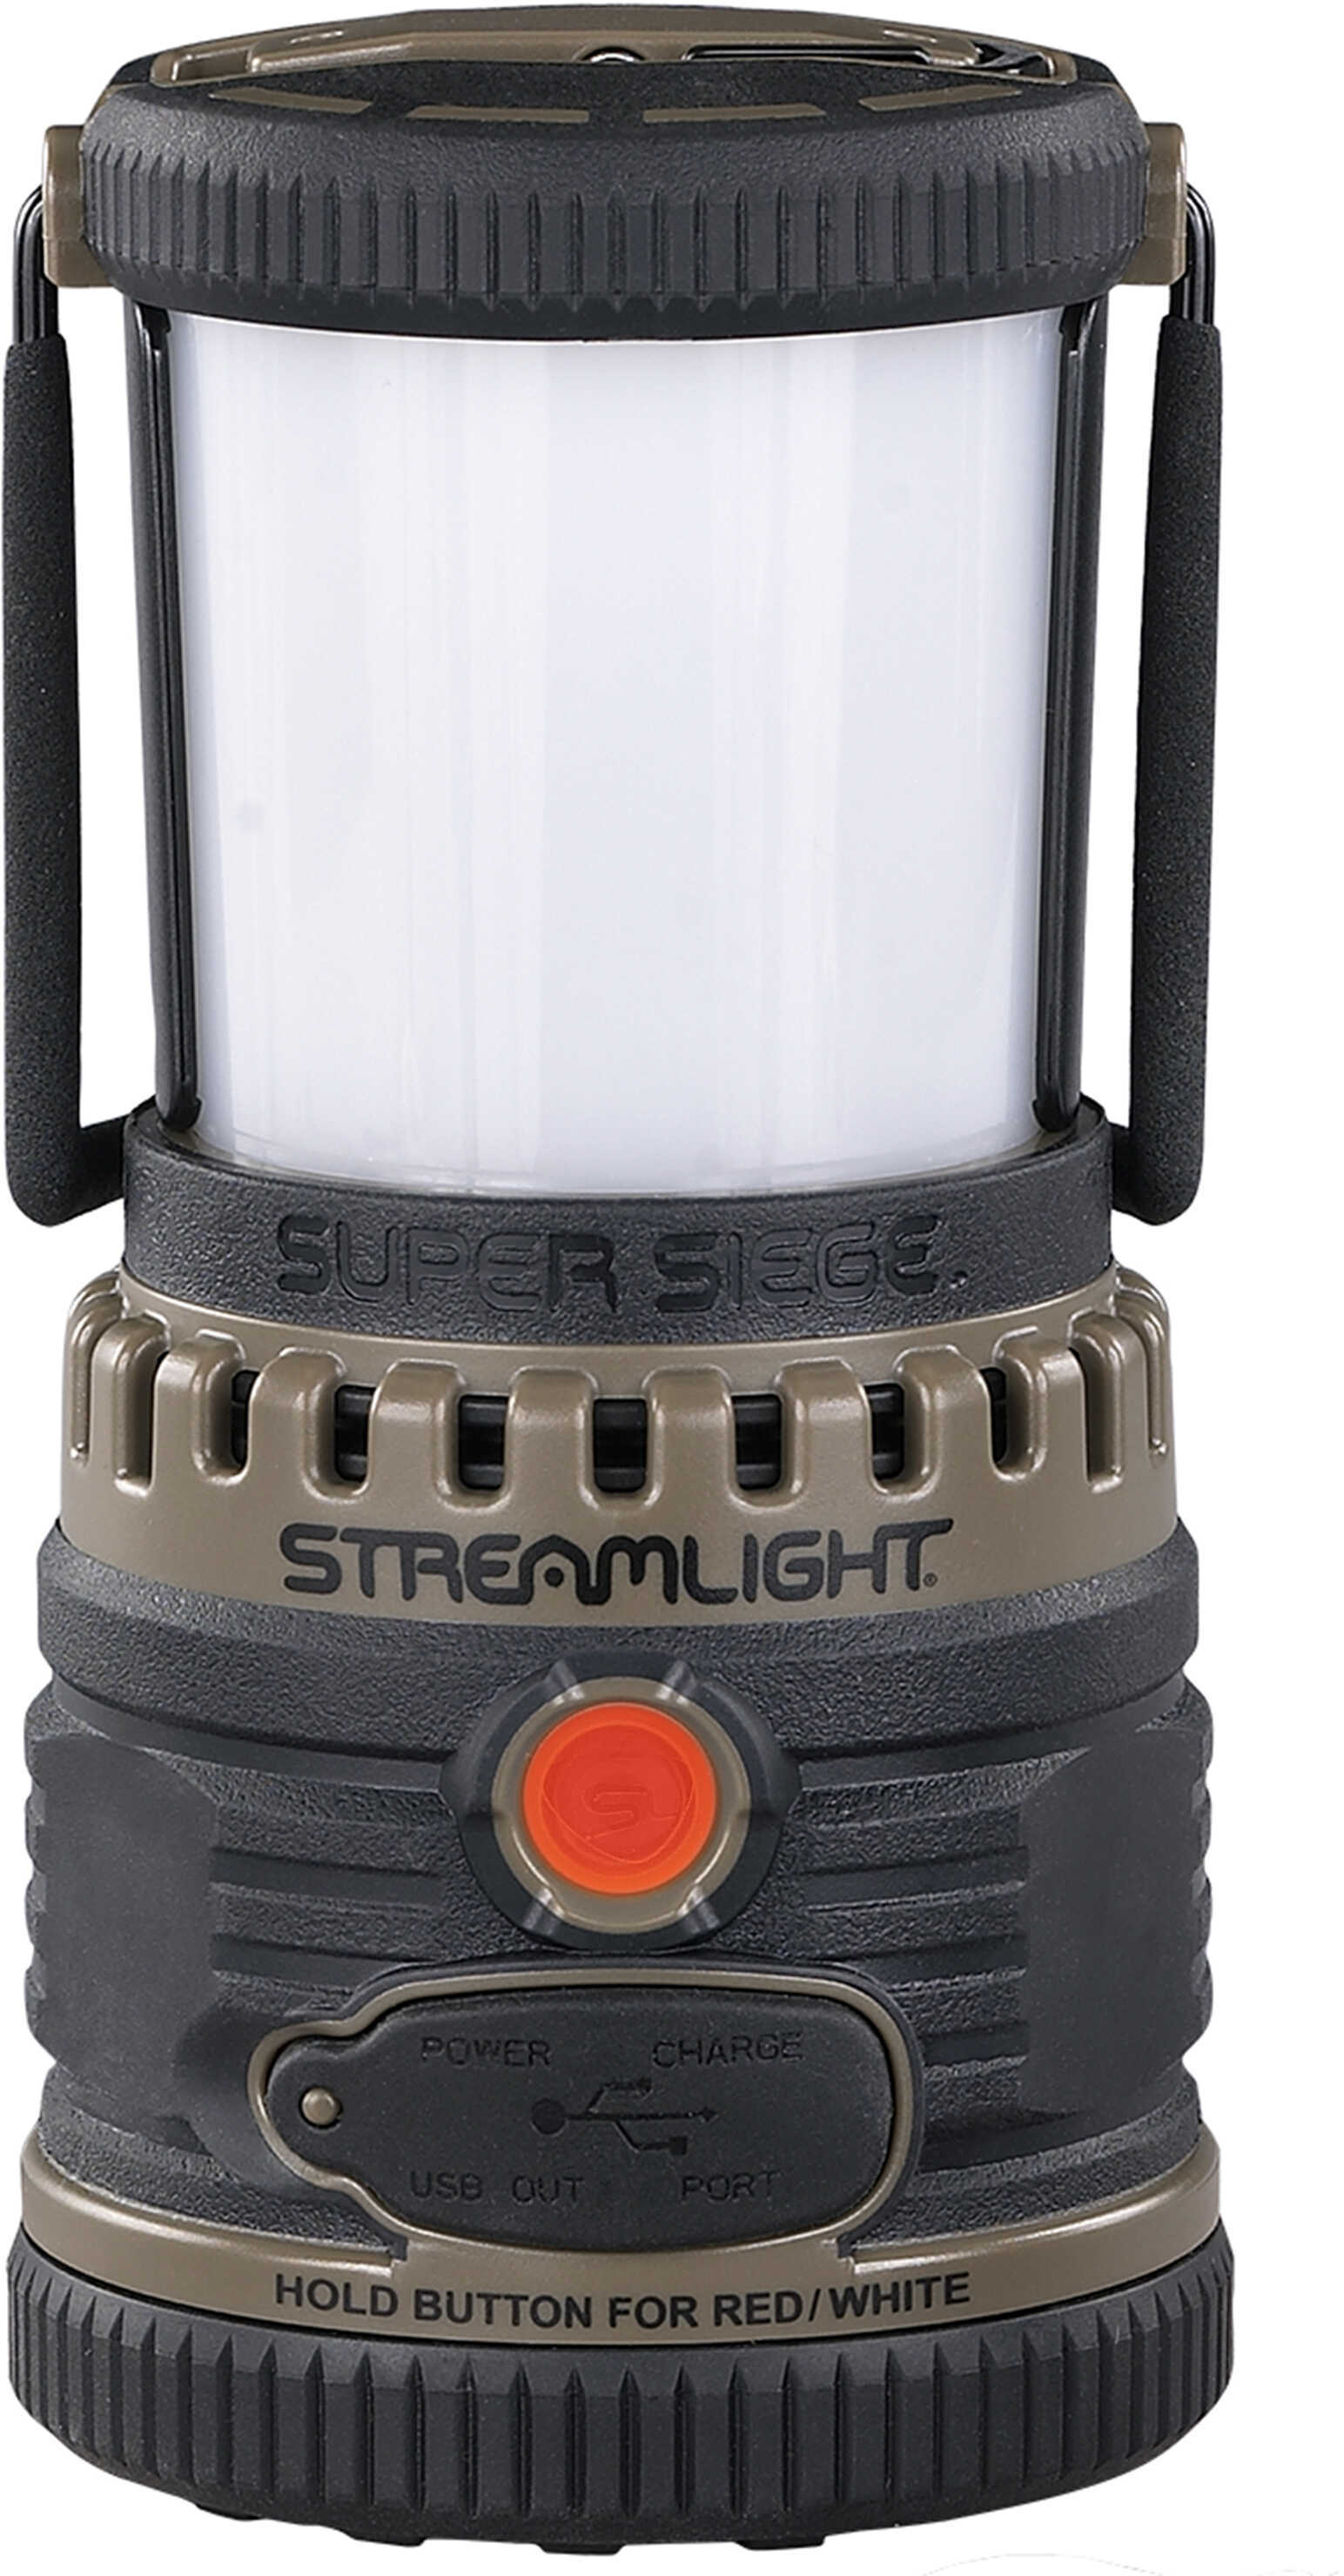 Streamlight Super Siege Rechargeable Lantern Portable USB Charger Coyote Brown 44947